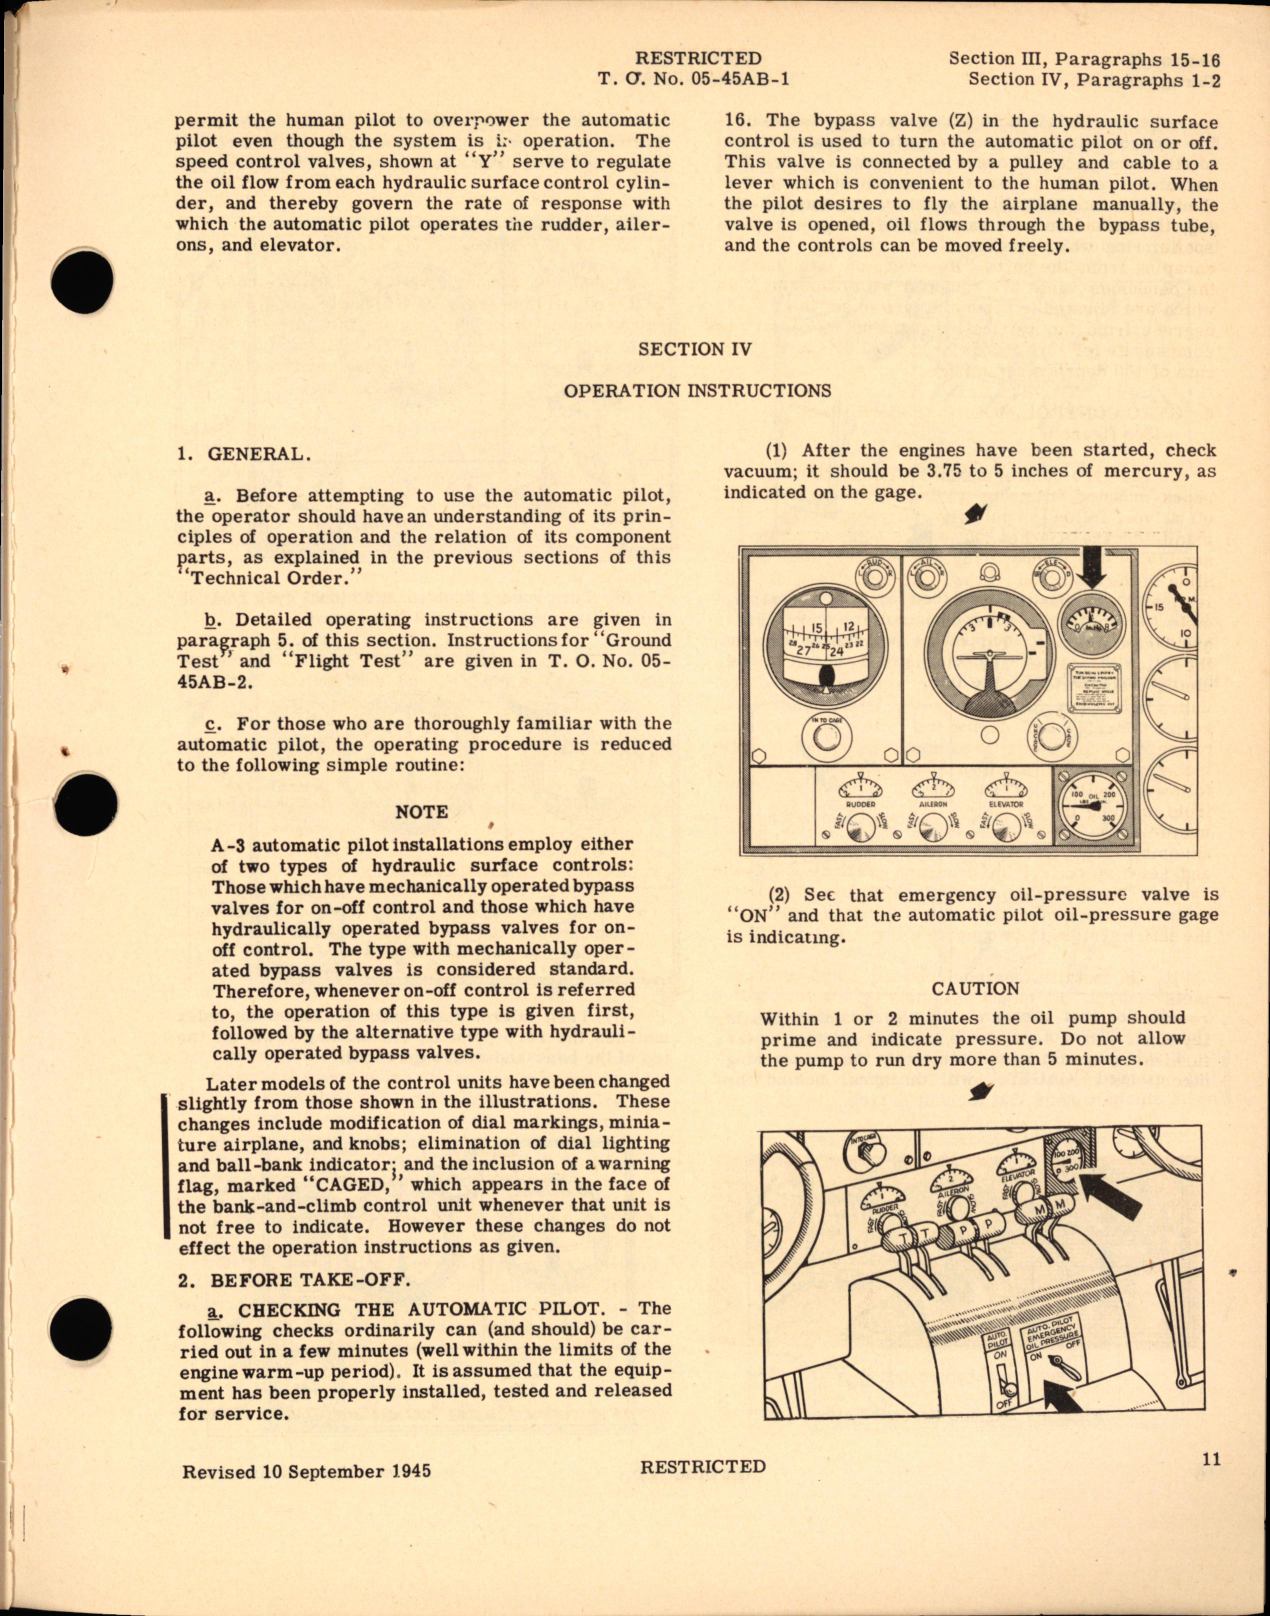 Sample page 11 from AirCorps Library document: Operation & Service Instructions for Automatic Pilot Type A-3